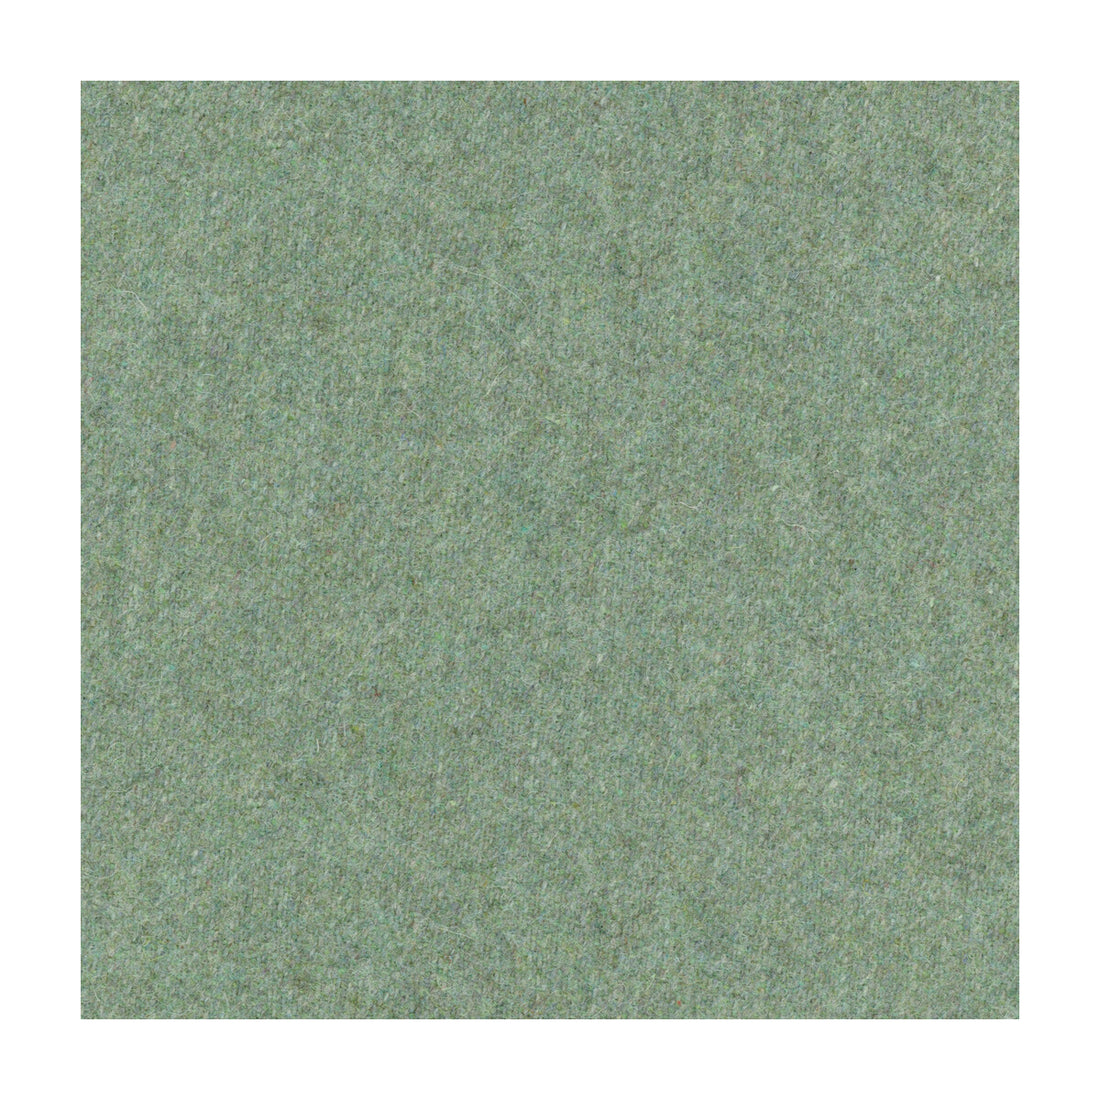 Jefferson Wool fabric in mint color - pattern 34397.303.0 - by Kravet Contract